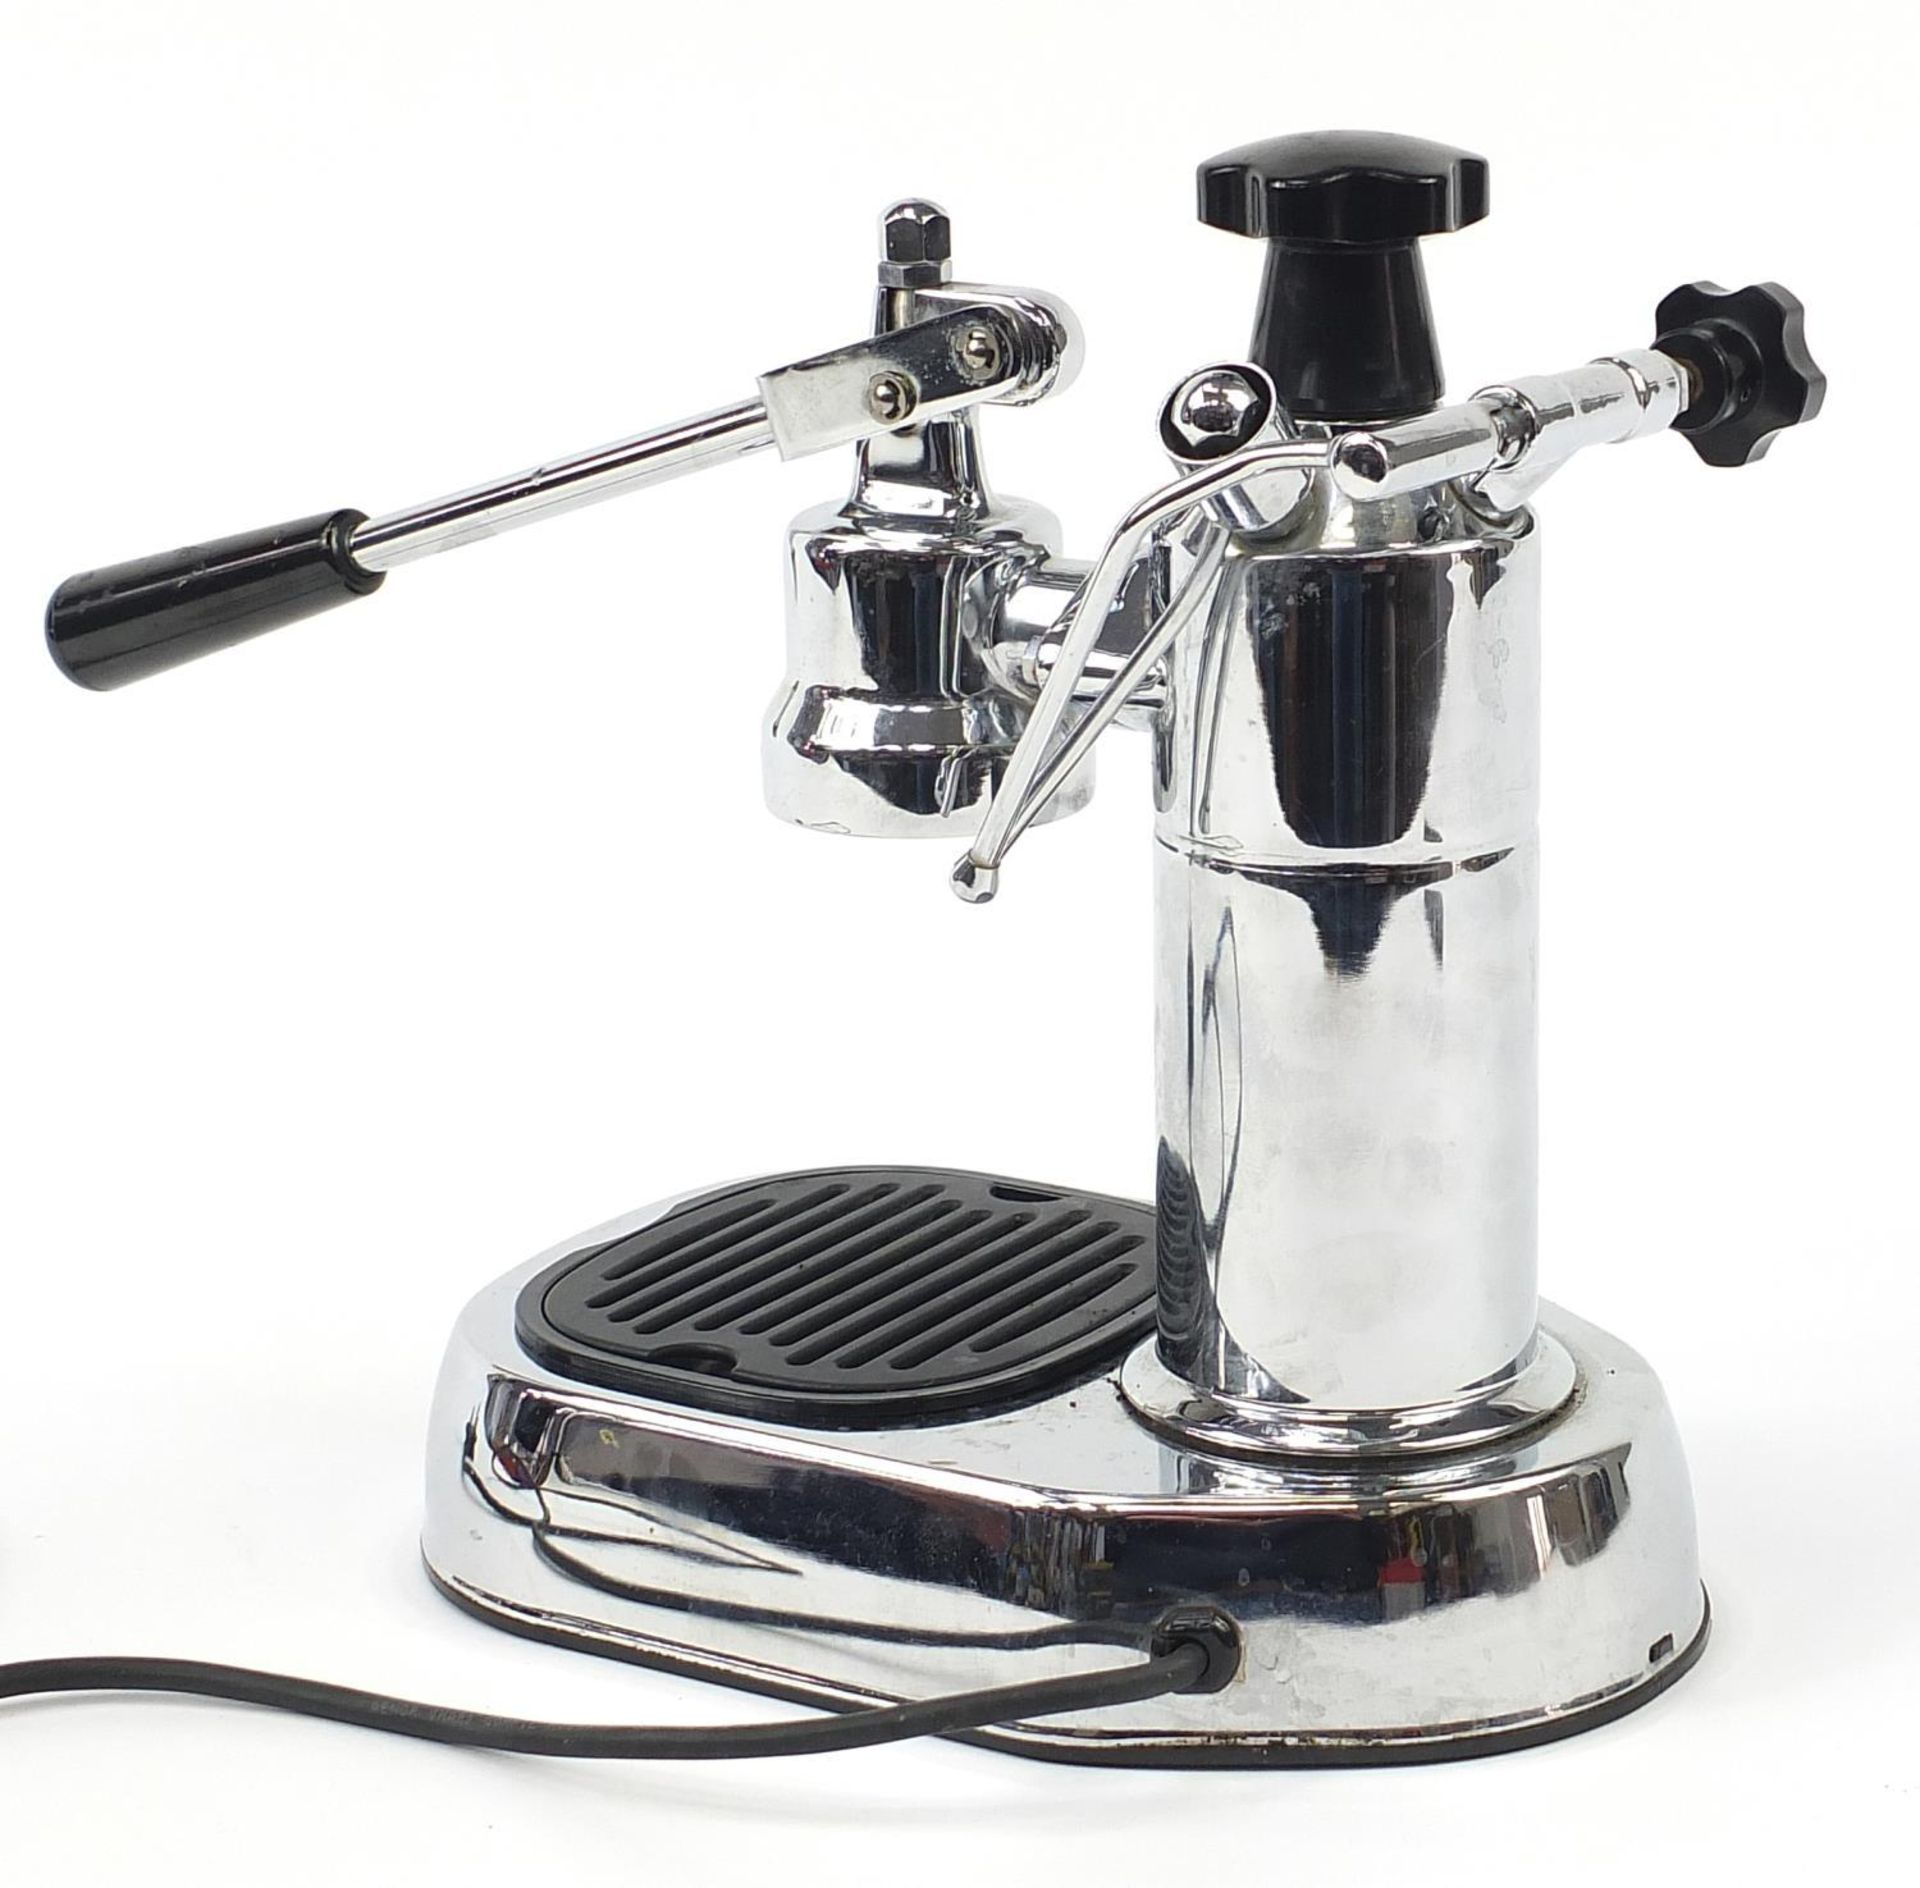 Europiccola Professional DAL1905 coffee machine by La Pavoni housed in a flight case : - Image 6 of 9